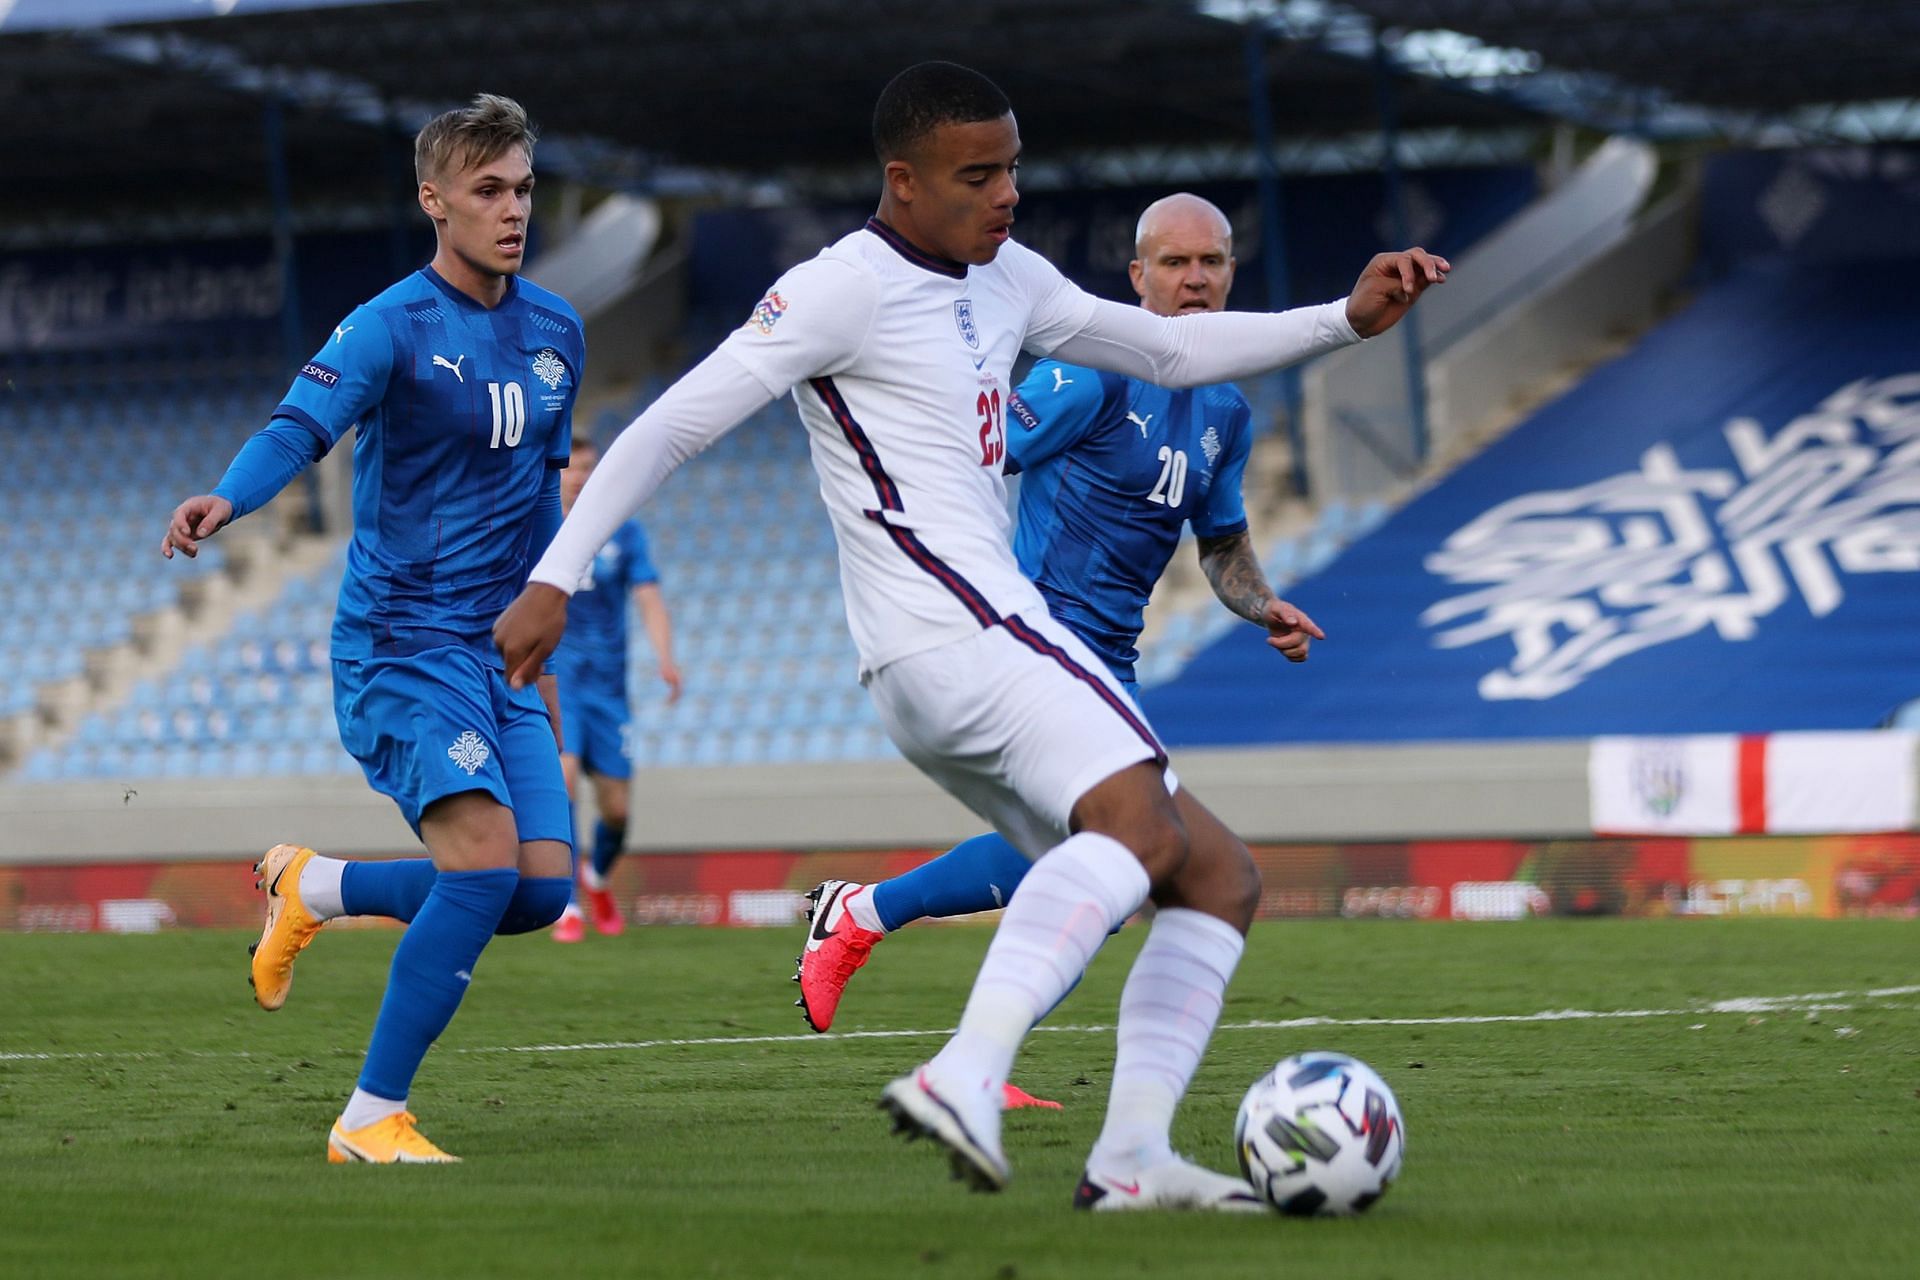 The young forward made his international debut against Iceland.